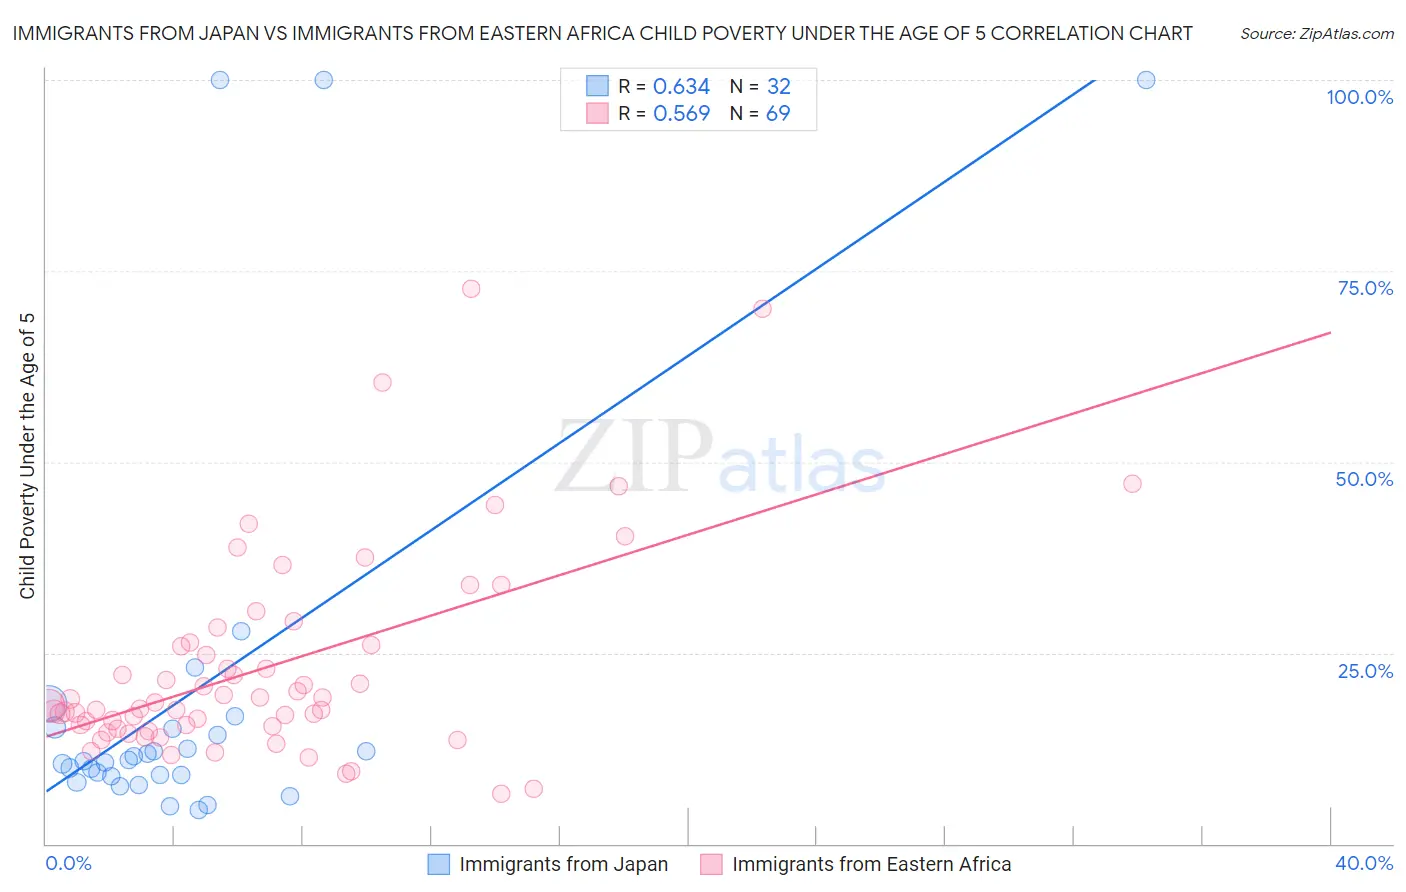 Immigrants from Japan vs Immigrants from Eastern Africa Child Poverty Under the Age of 5